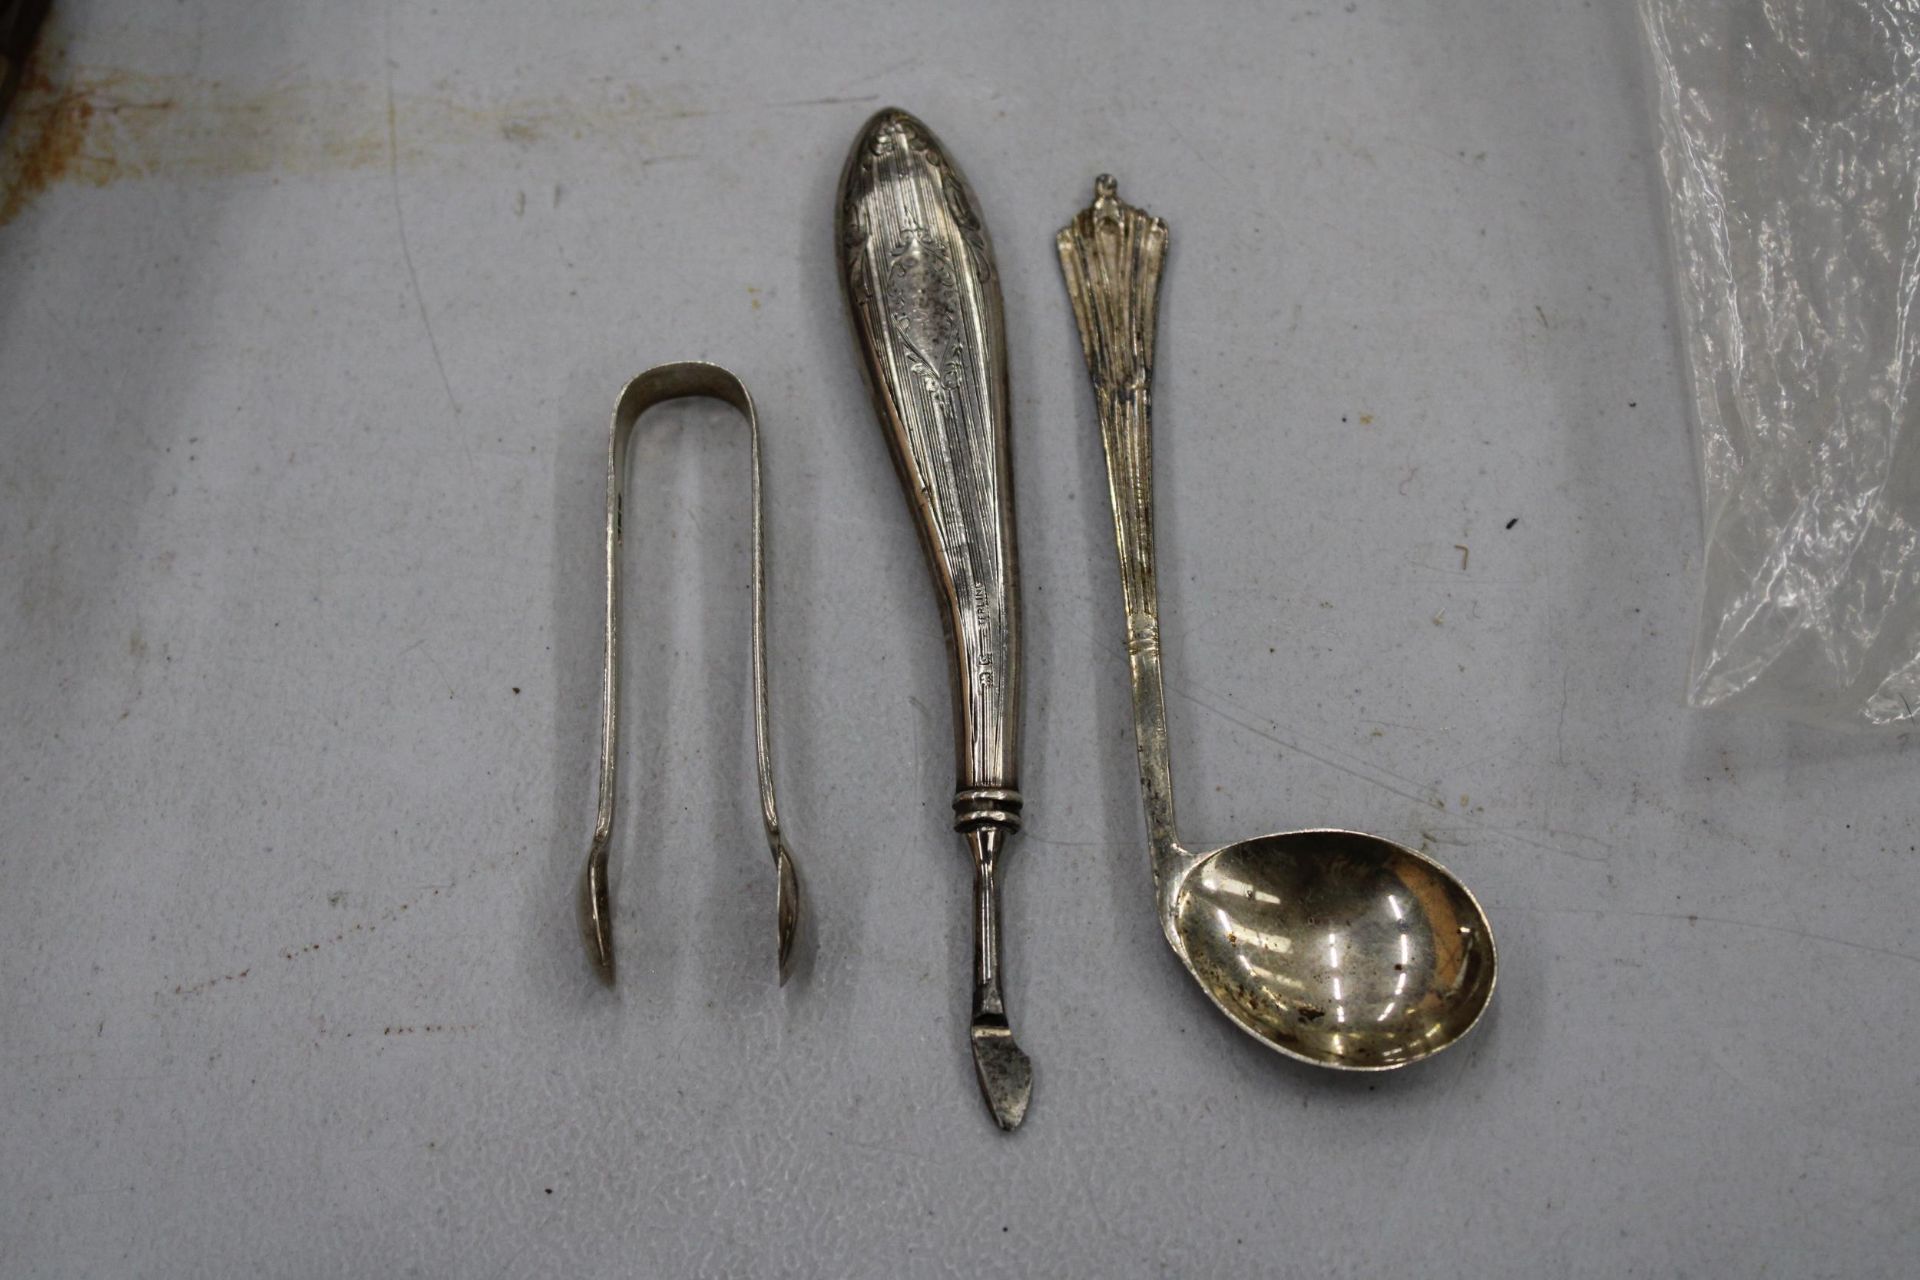 THREE MARKED SILVER ITEMS TO INCLUDE A GOLF CLUB SHAPED SPOON, SUGAR TONGS AND A MANICURE TOOL